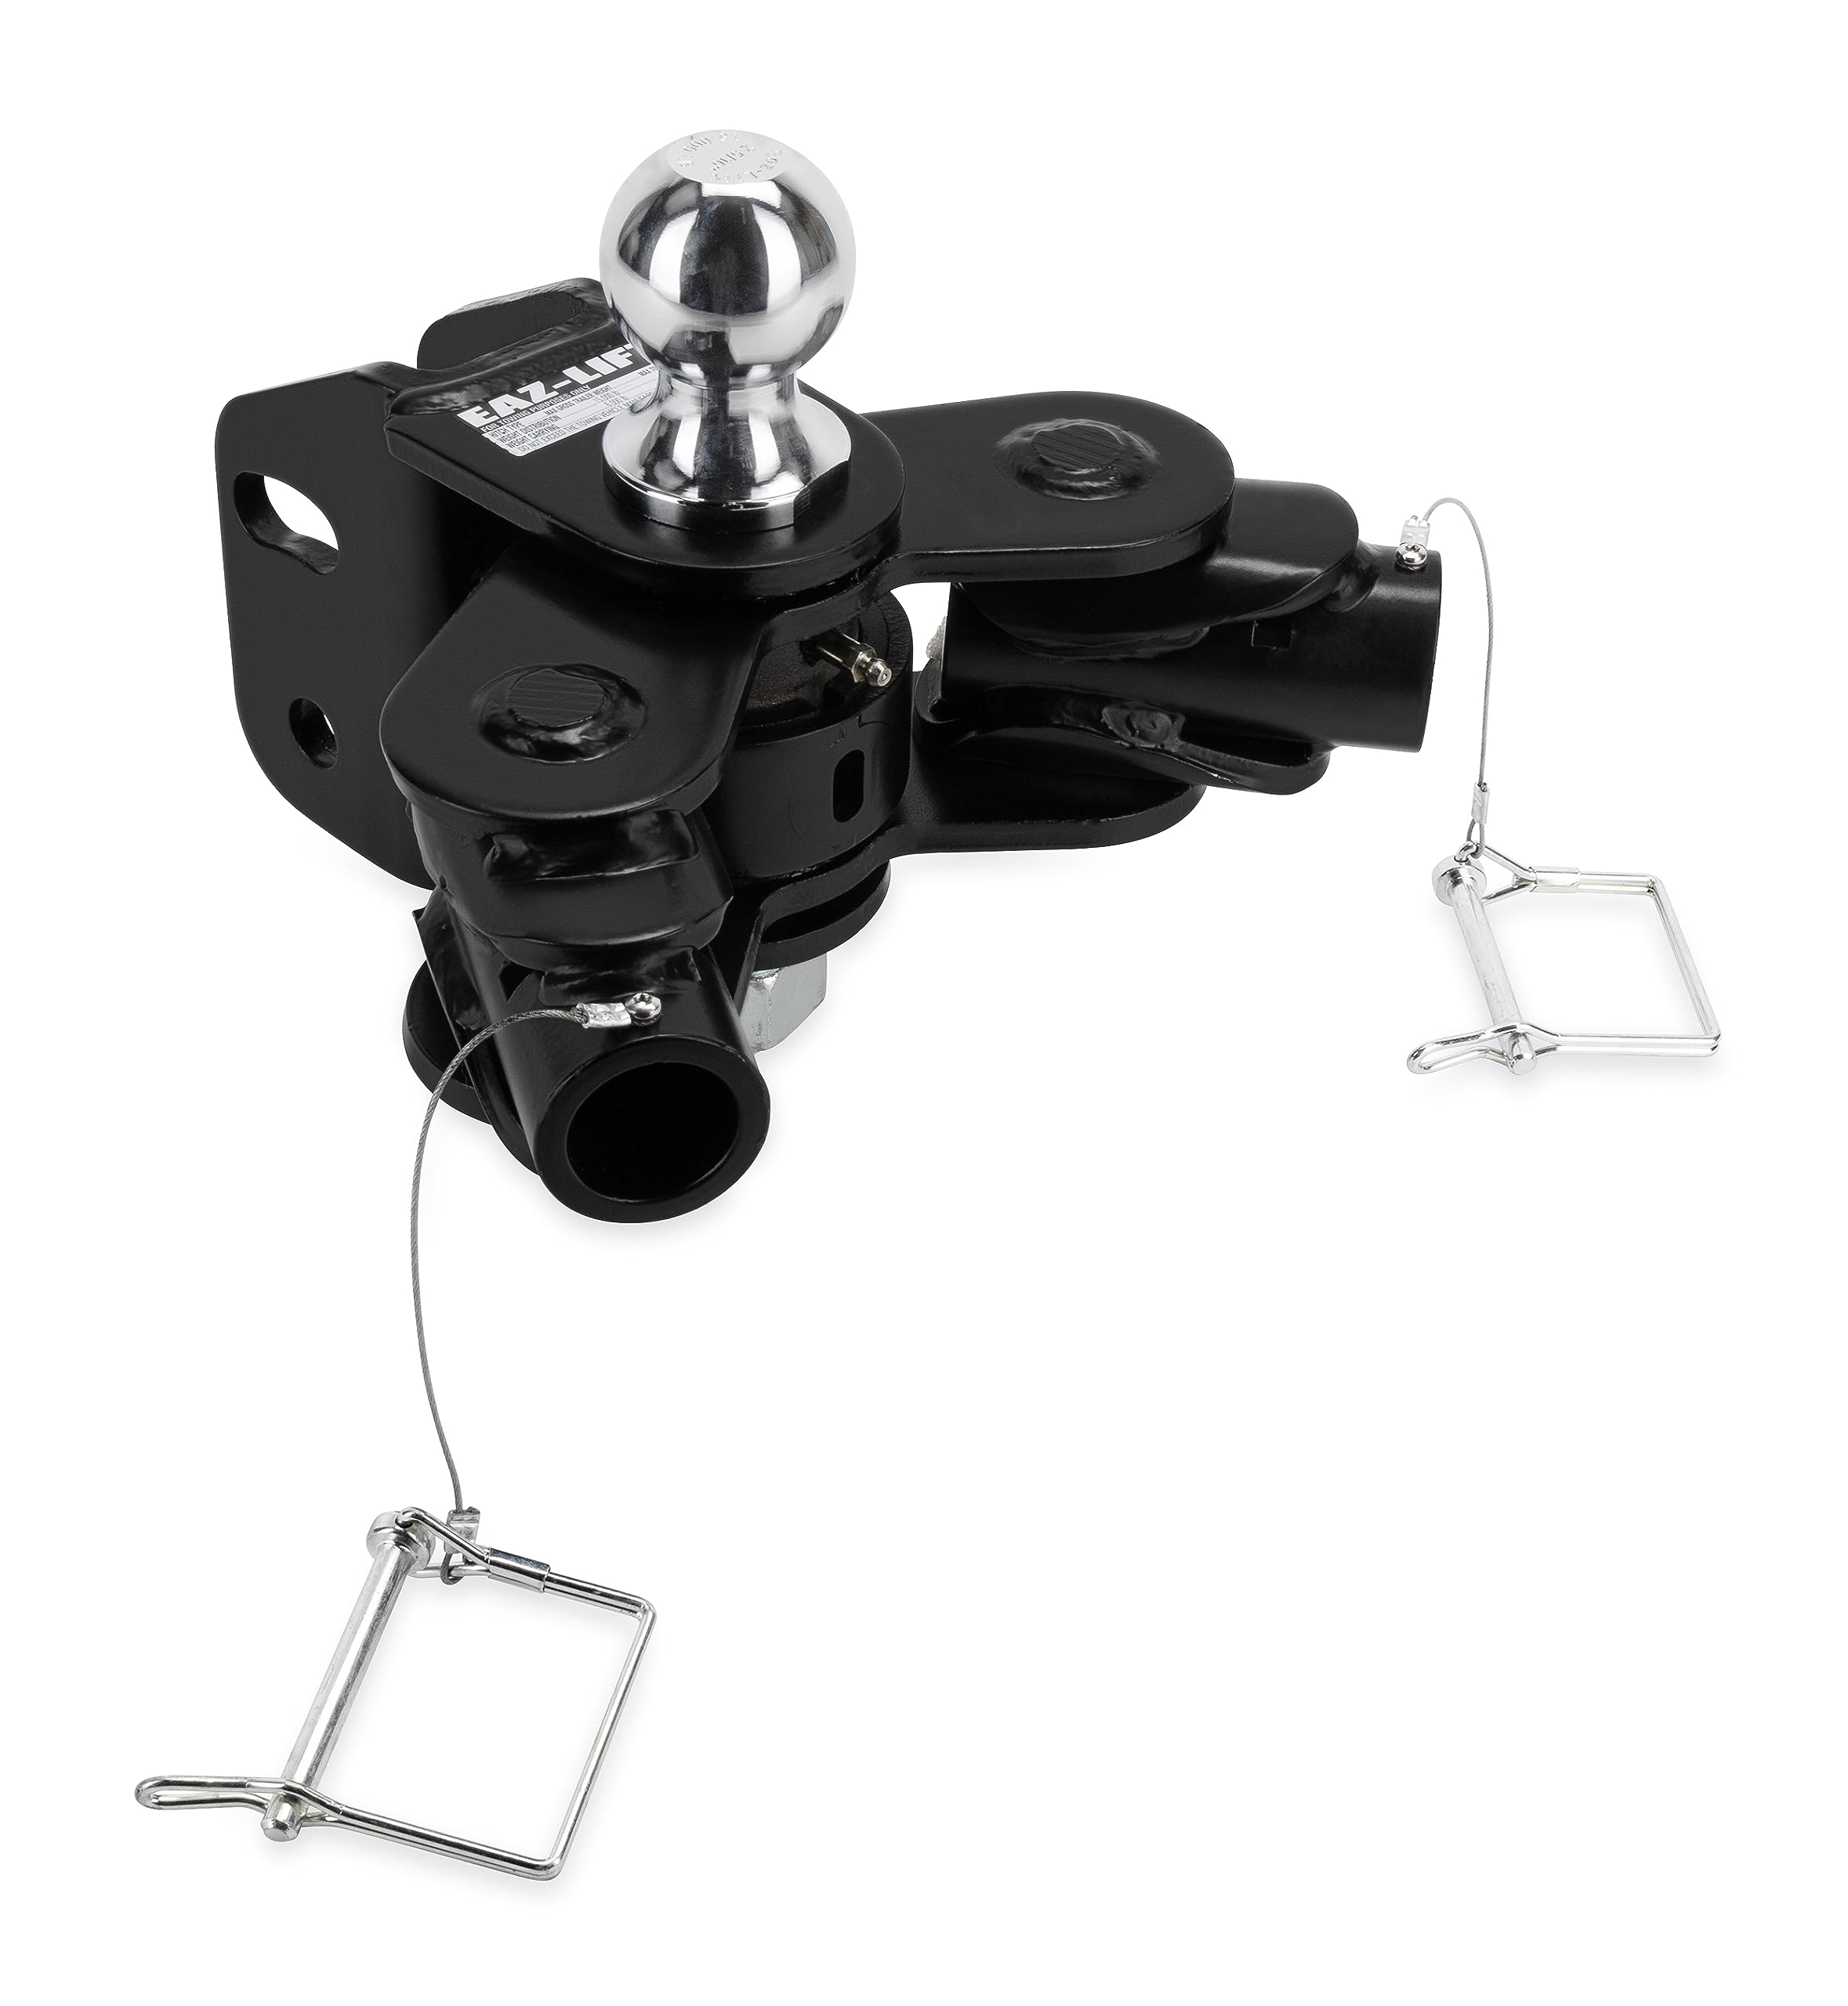 Camco Eaz-Lift Camper/RV TR3 1,000lb Weight Distribution Hitch Kit | Features Adjustable Sway Control & Pre-Installed 2-5/16-inch Hitch Ball | 1,200lb Max Tongue Weight Rating (48900)